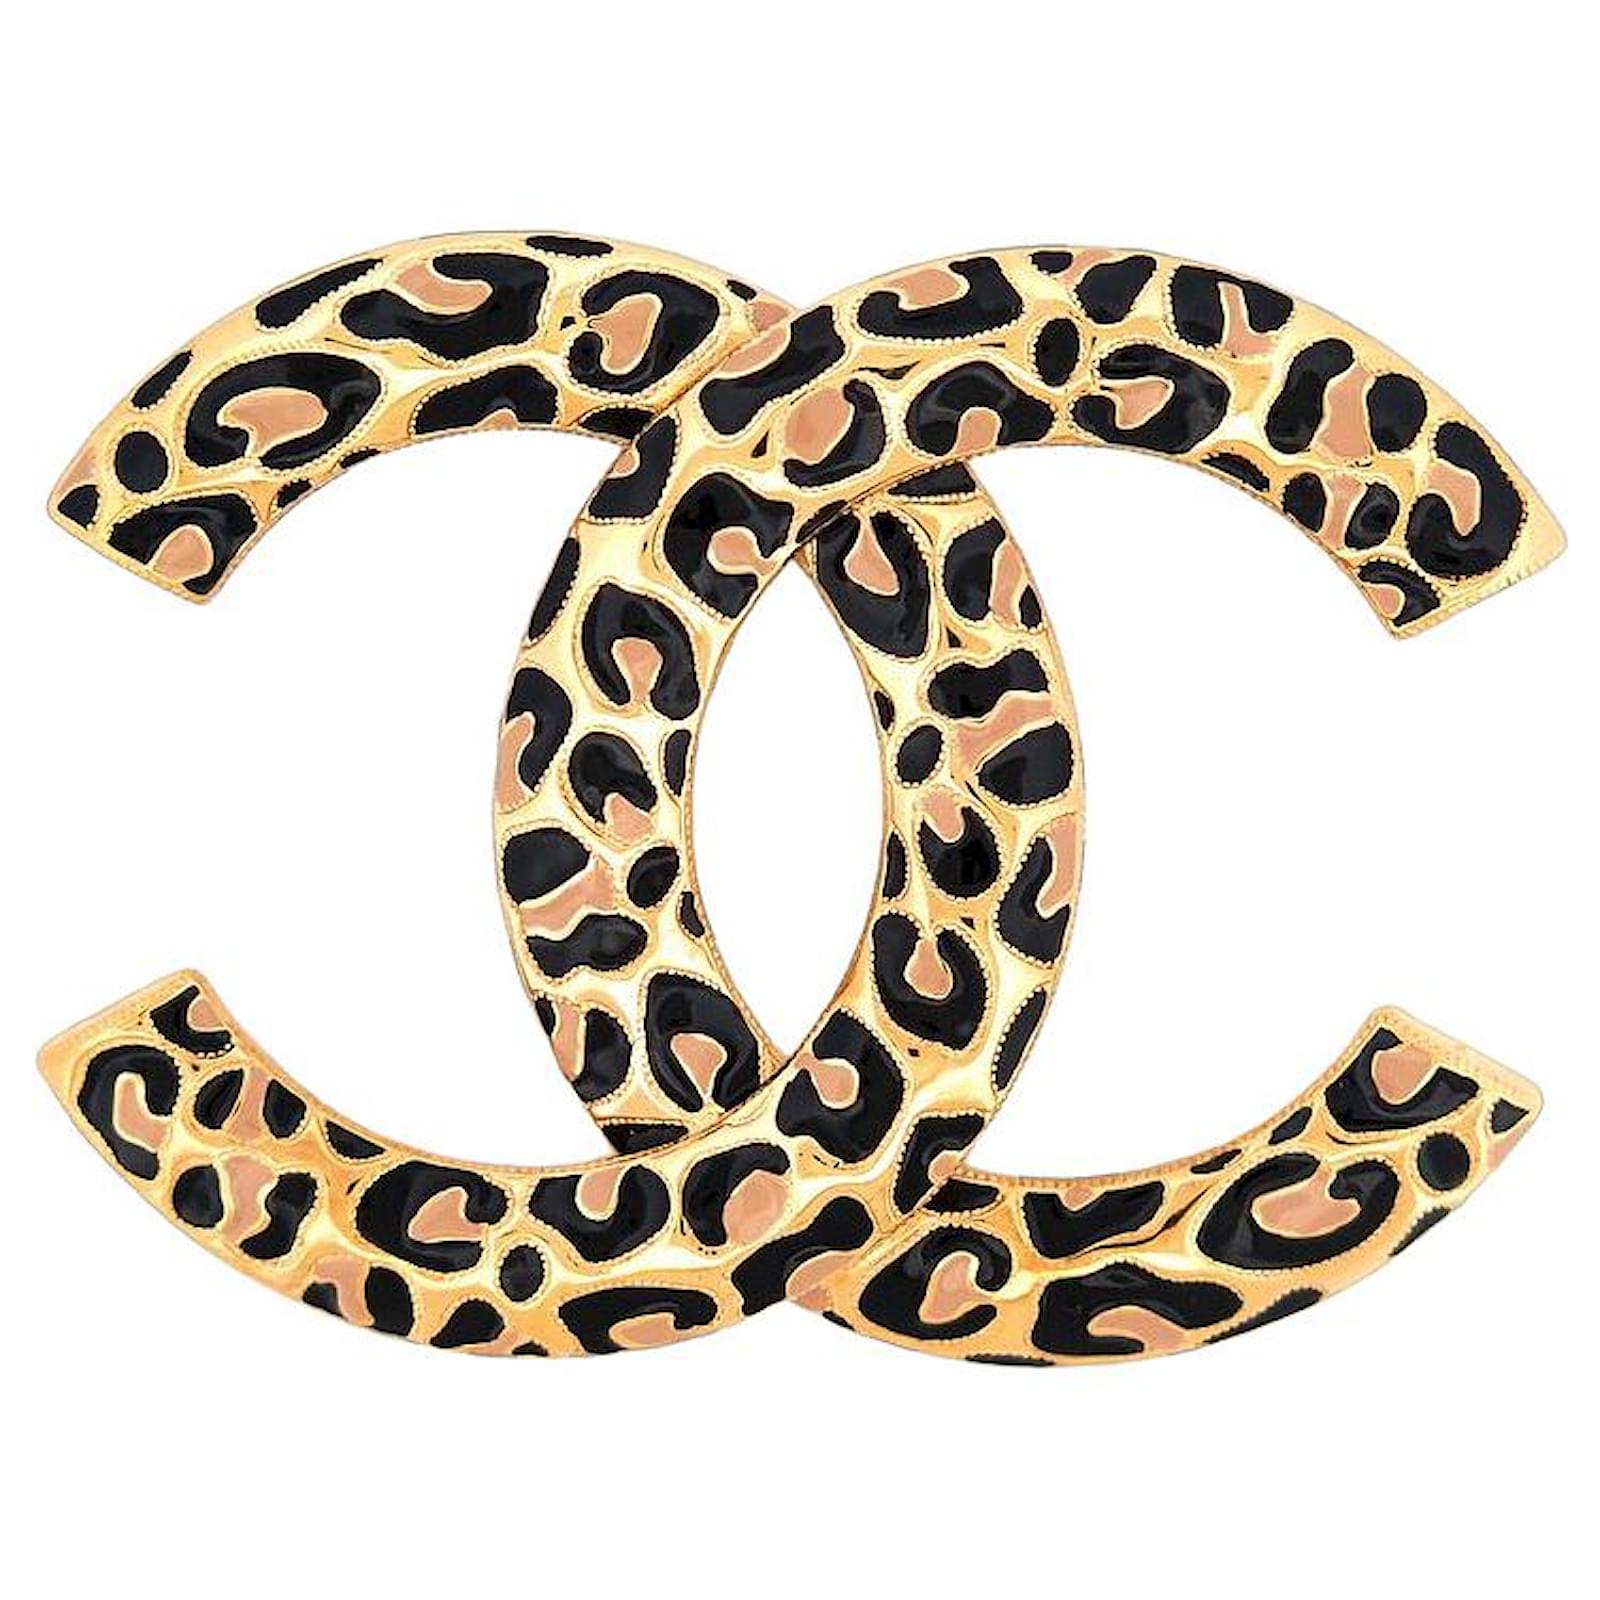 NEW CHANEL LOGO CC PANTHER BROOCH IN GOLD METAL NEW GOLDEN PANTHER BROOCH